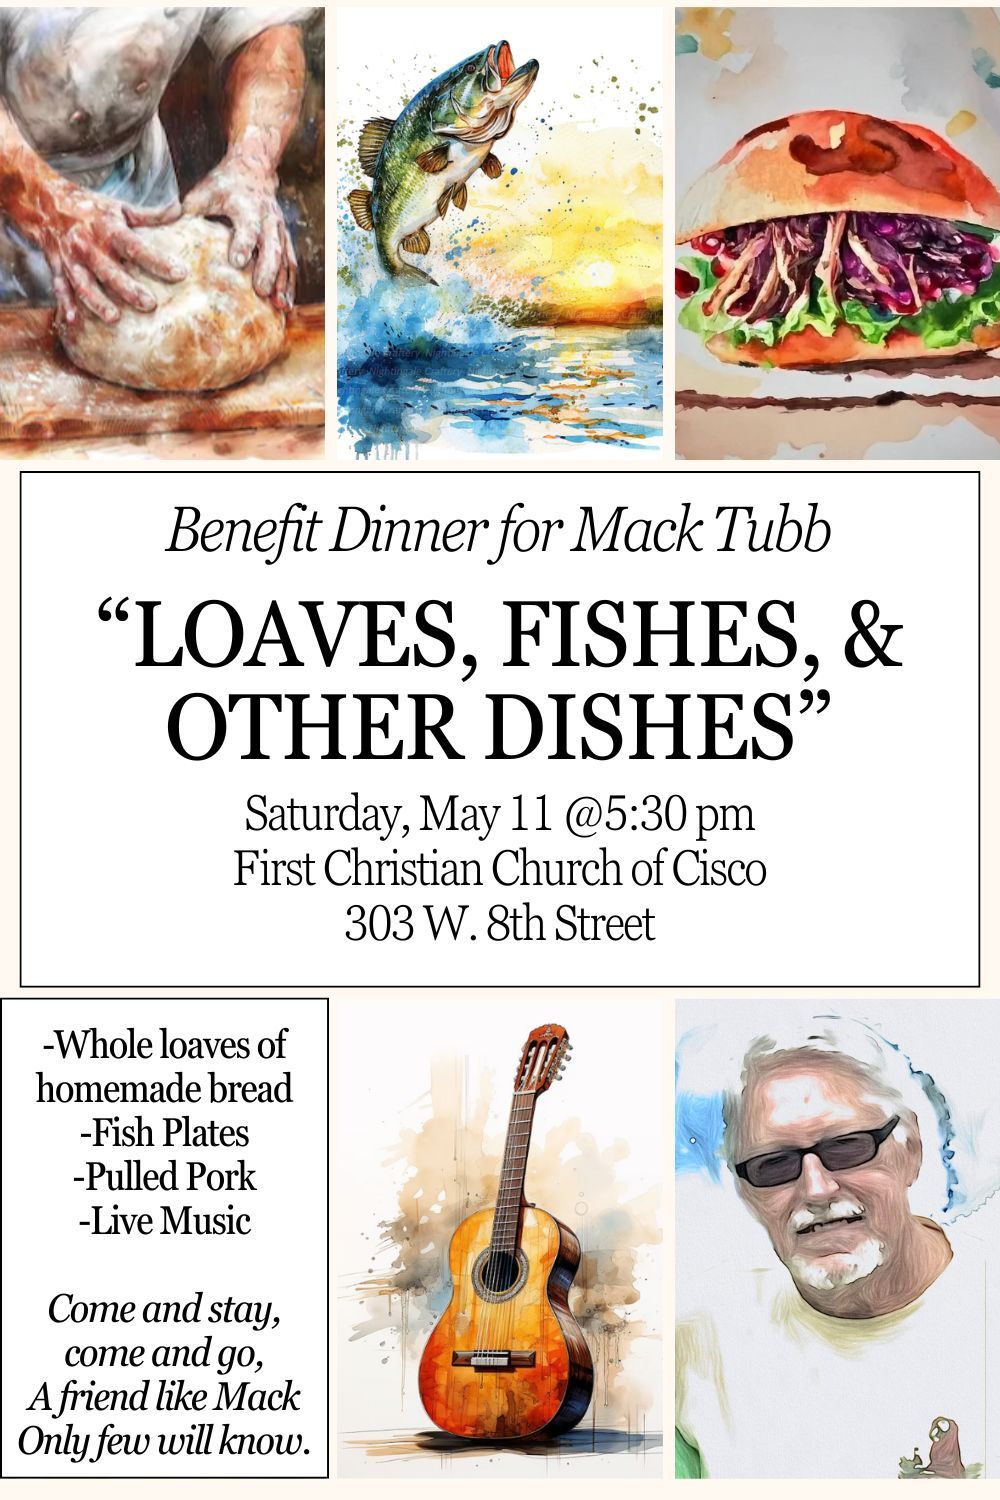 "Loaves, Fishes, & Other Dishes" - A Benefit Dinner for Mack Tubb